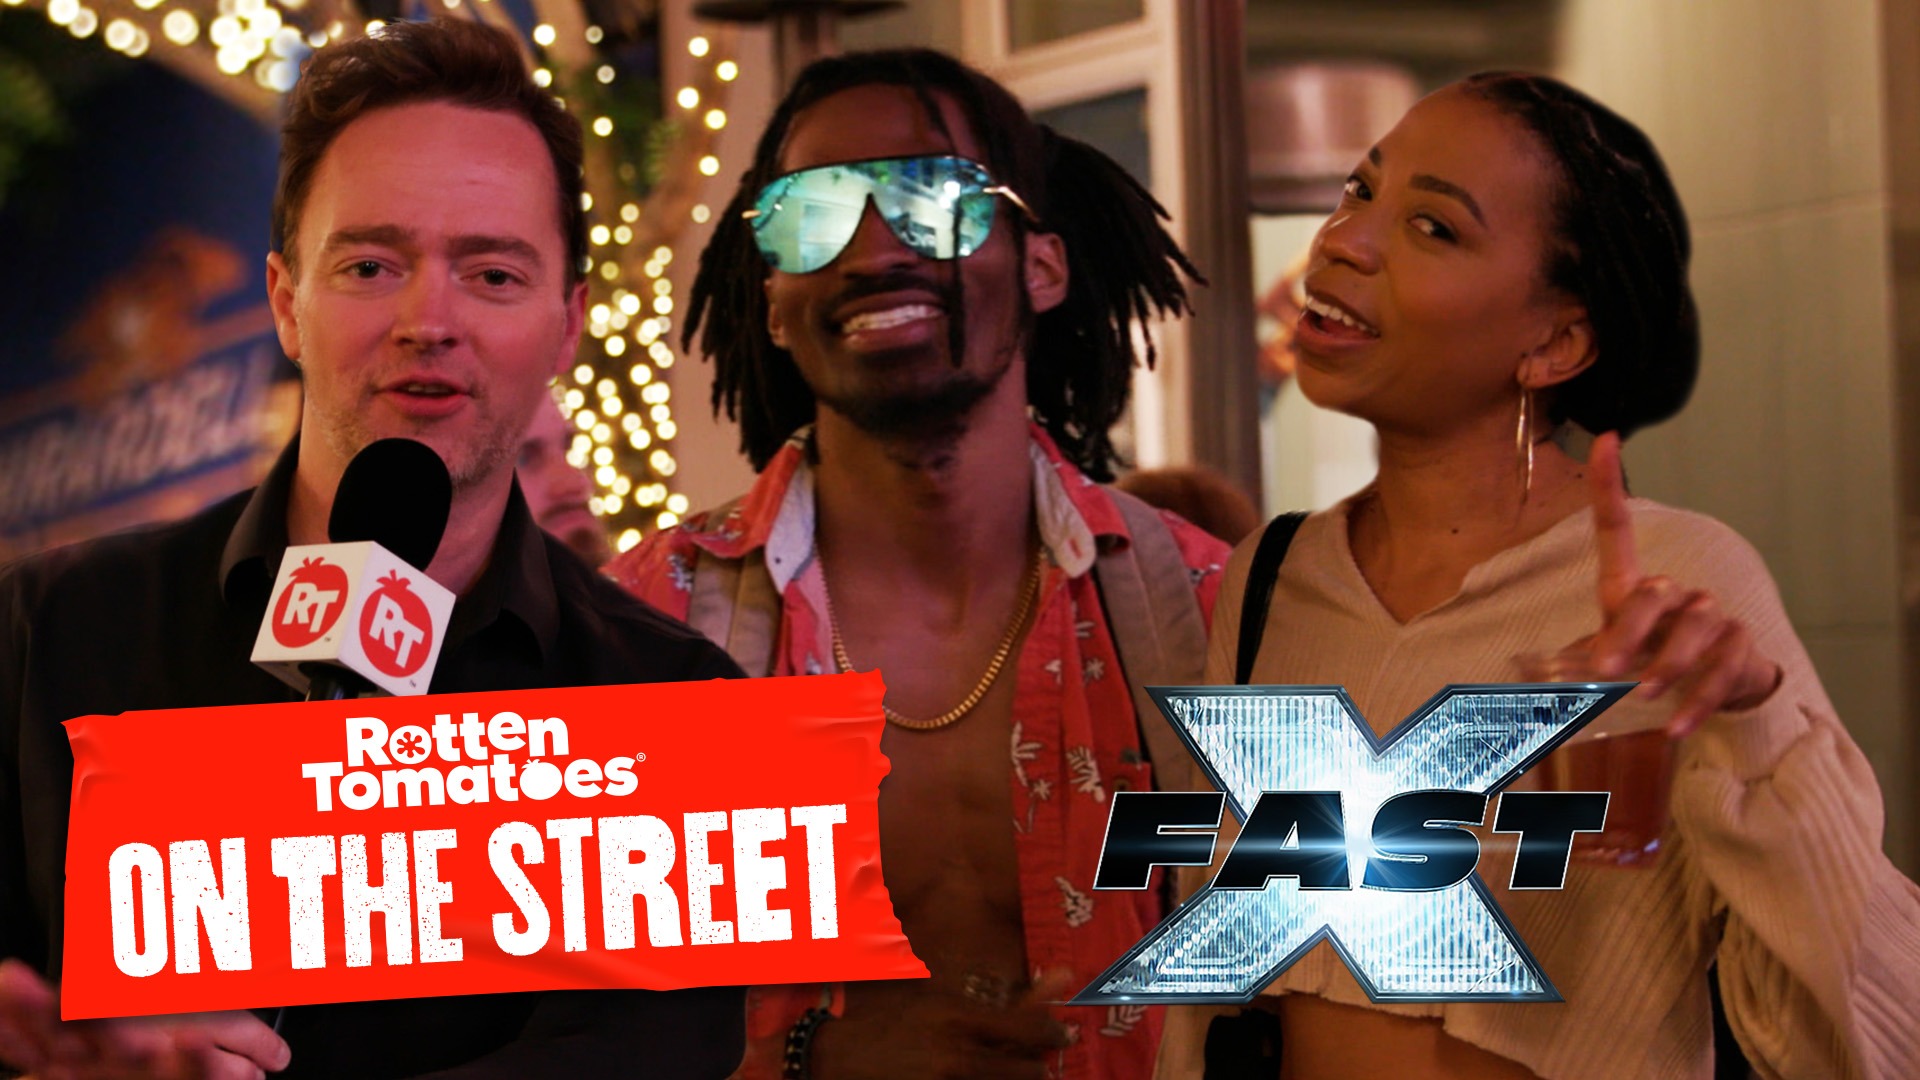 Fast X - Trailer 2, movie theater, film trailer, Watch the action-packed  new trailer for #FASTX - in theaters May 19., By Rotten Tomatoes